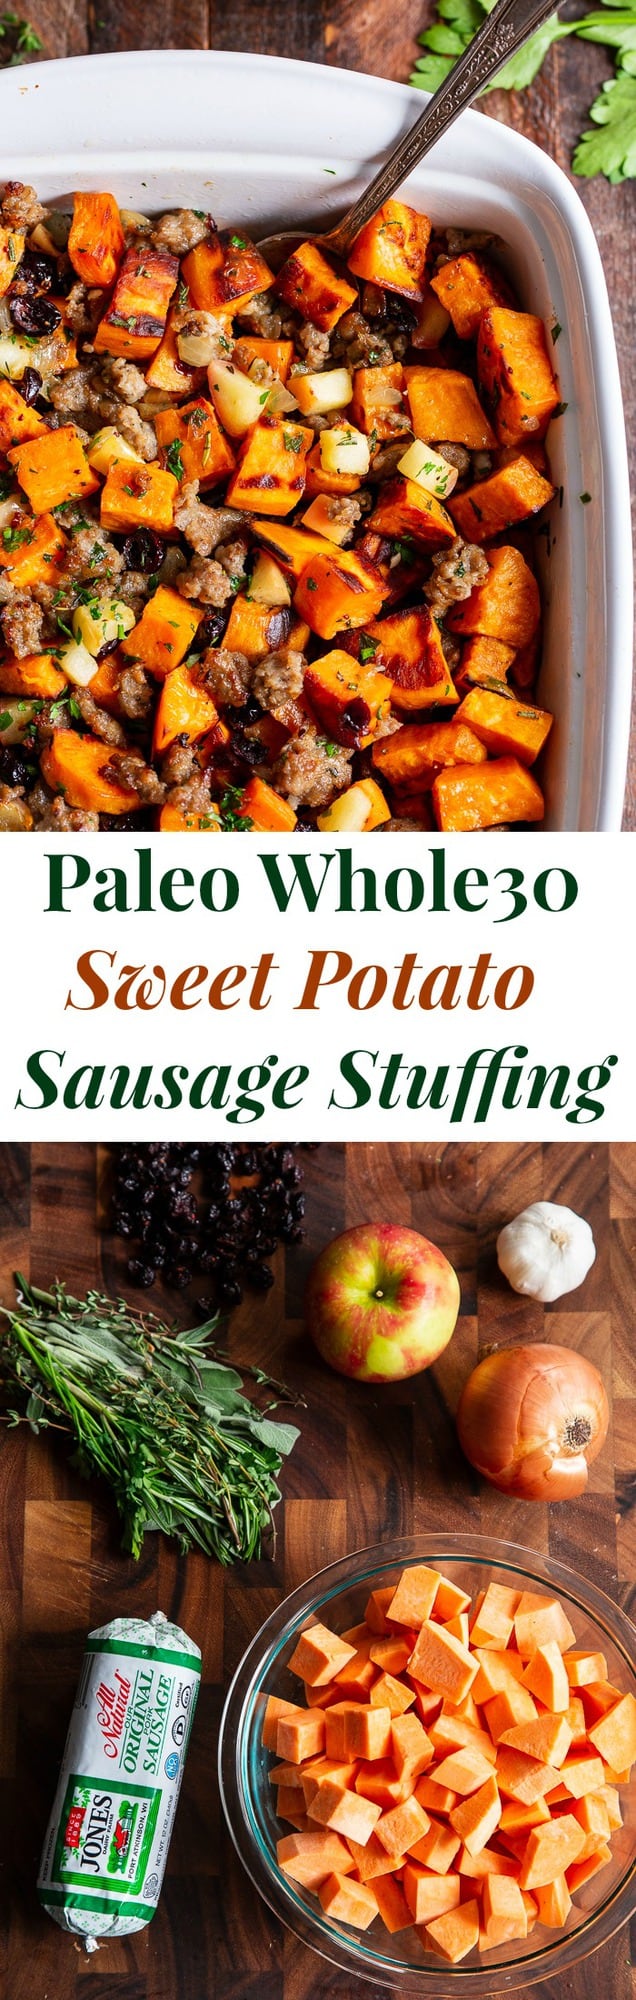 This delicious Paleo Sweet Potato Stuffing with Jones Dairy Farm No Sugar All Natural Pork Sausage Roll, apples and cranberries has all the flavor of traditional Thanksgiving stuffing but is grain free, gluten free, dairy free and Whole30 compliant too! Toasty, roasted sweet potatoes and savory, all natural sausage form the base of this favorite holiday side dish. It’s sweet savory perfection! #AD #Jonesdairyfarm